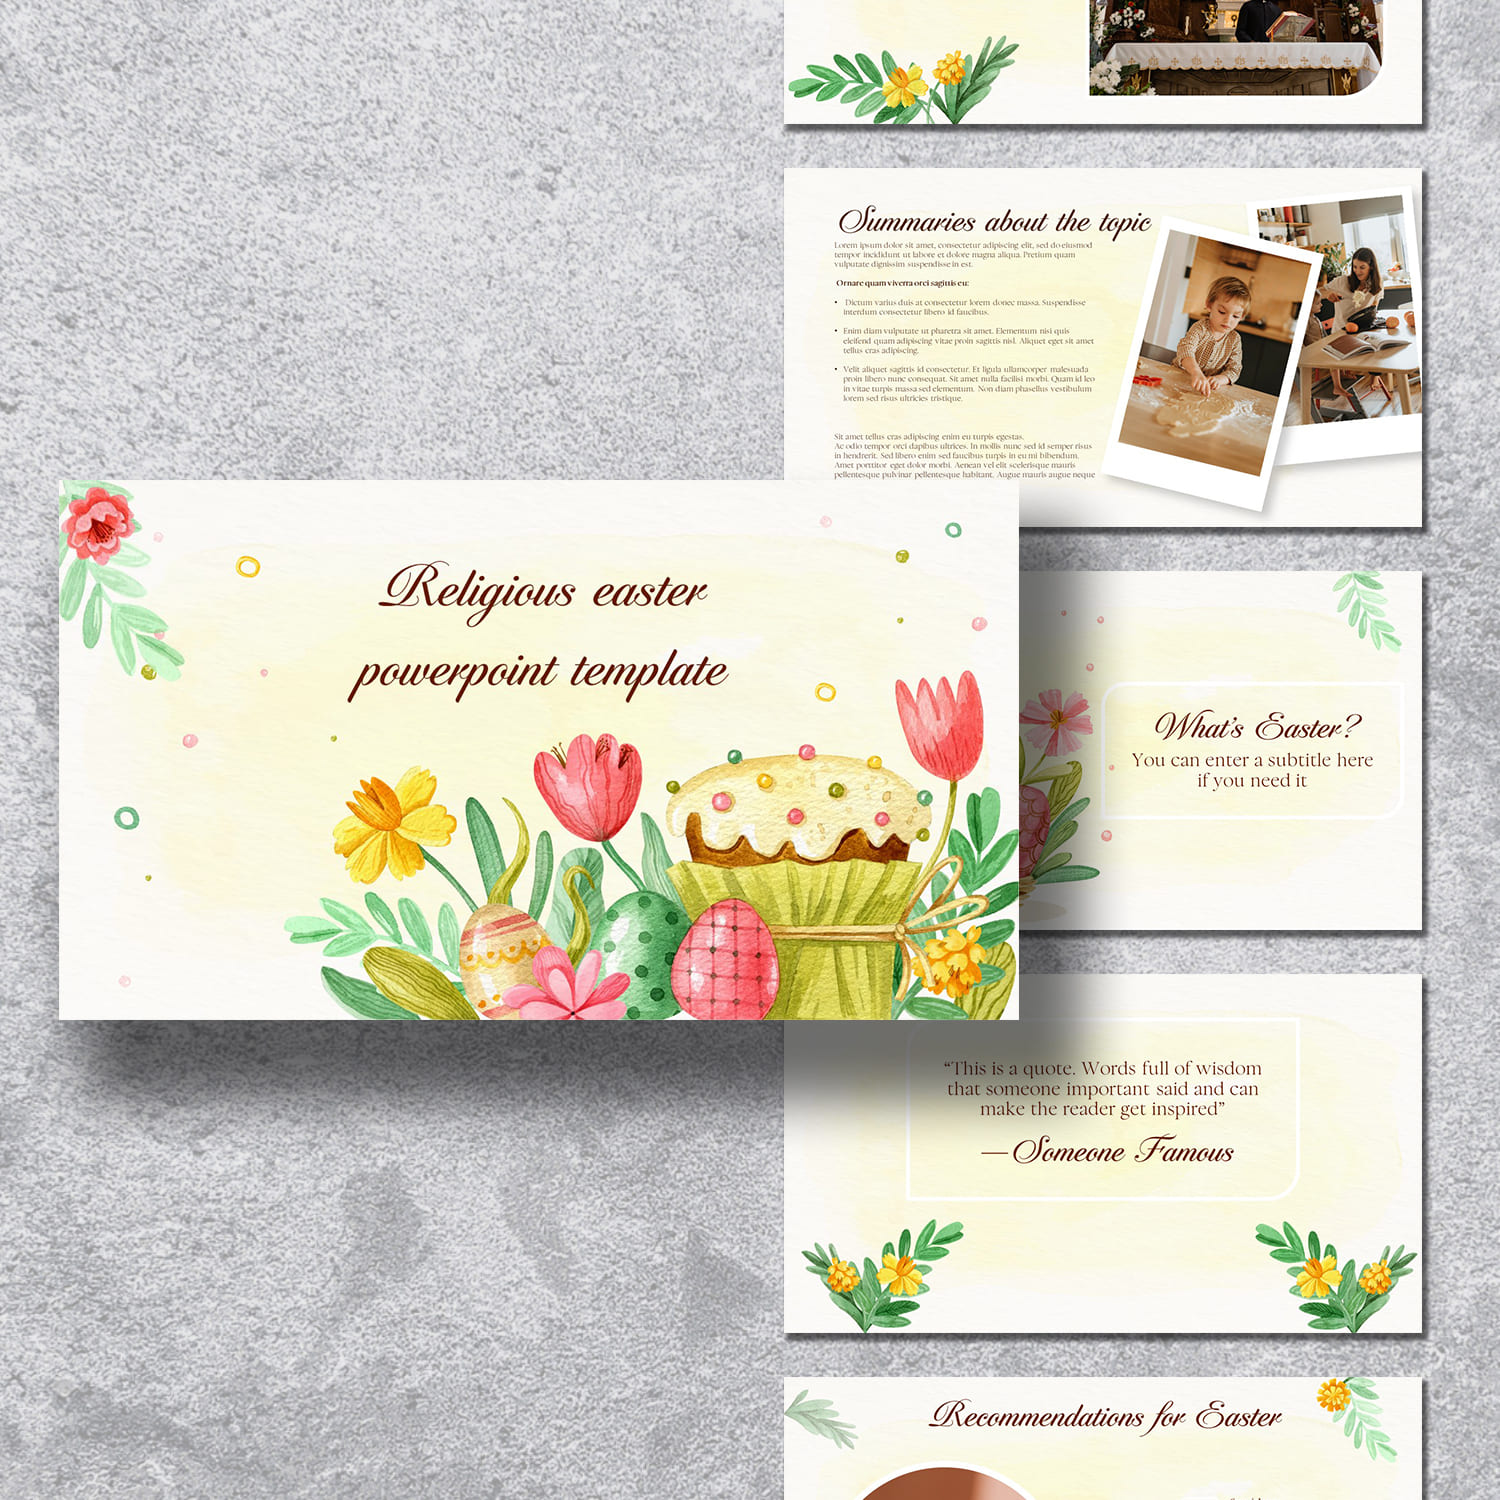 Religious Easter Powerpoint Template - main image preview.